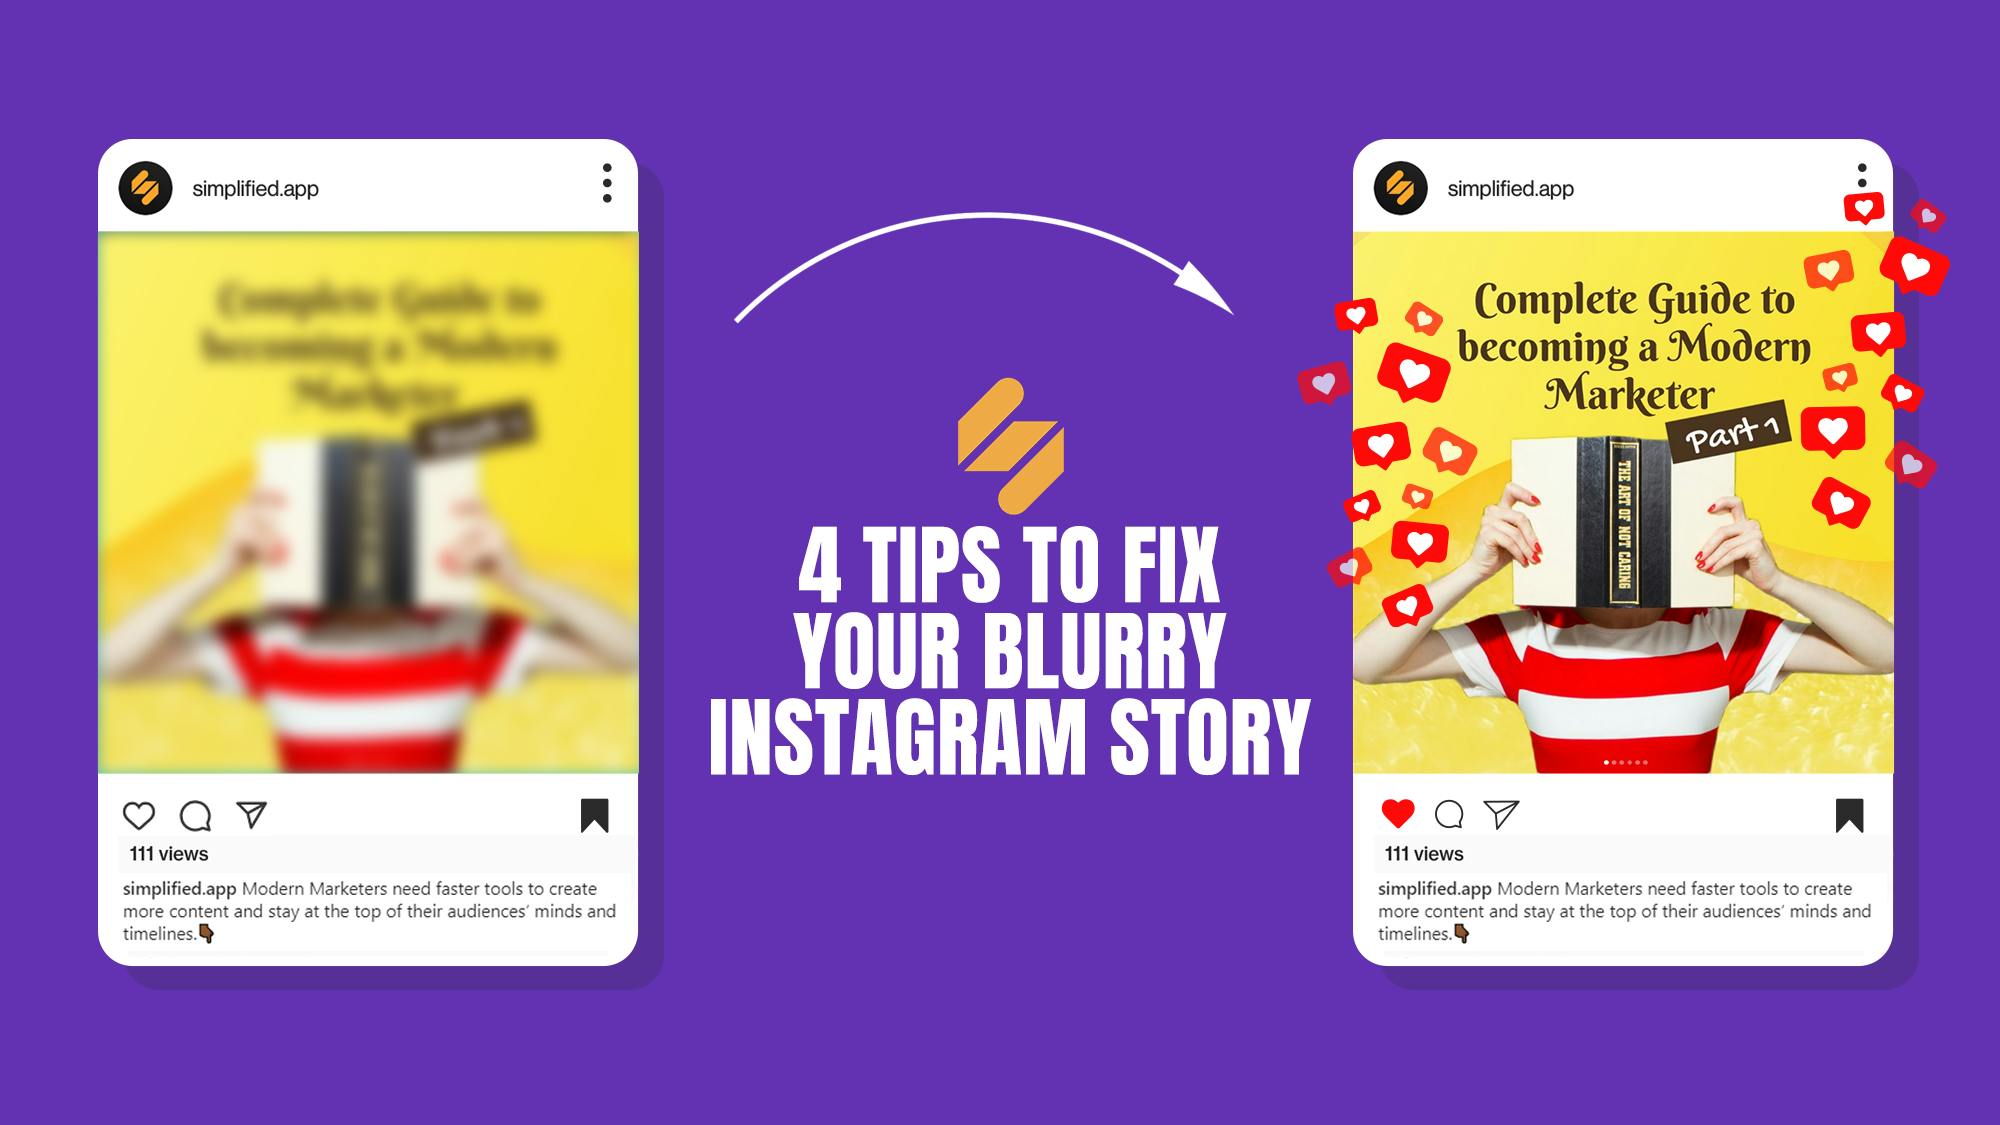 Here are 4 tips to fix your blurry Instagram Stories | Simplified